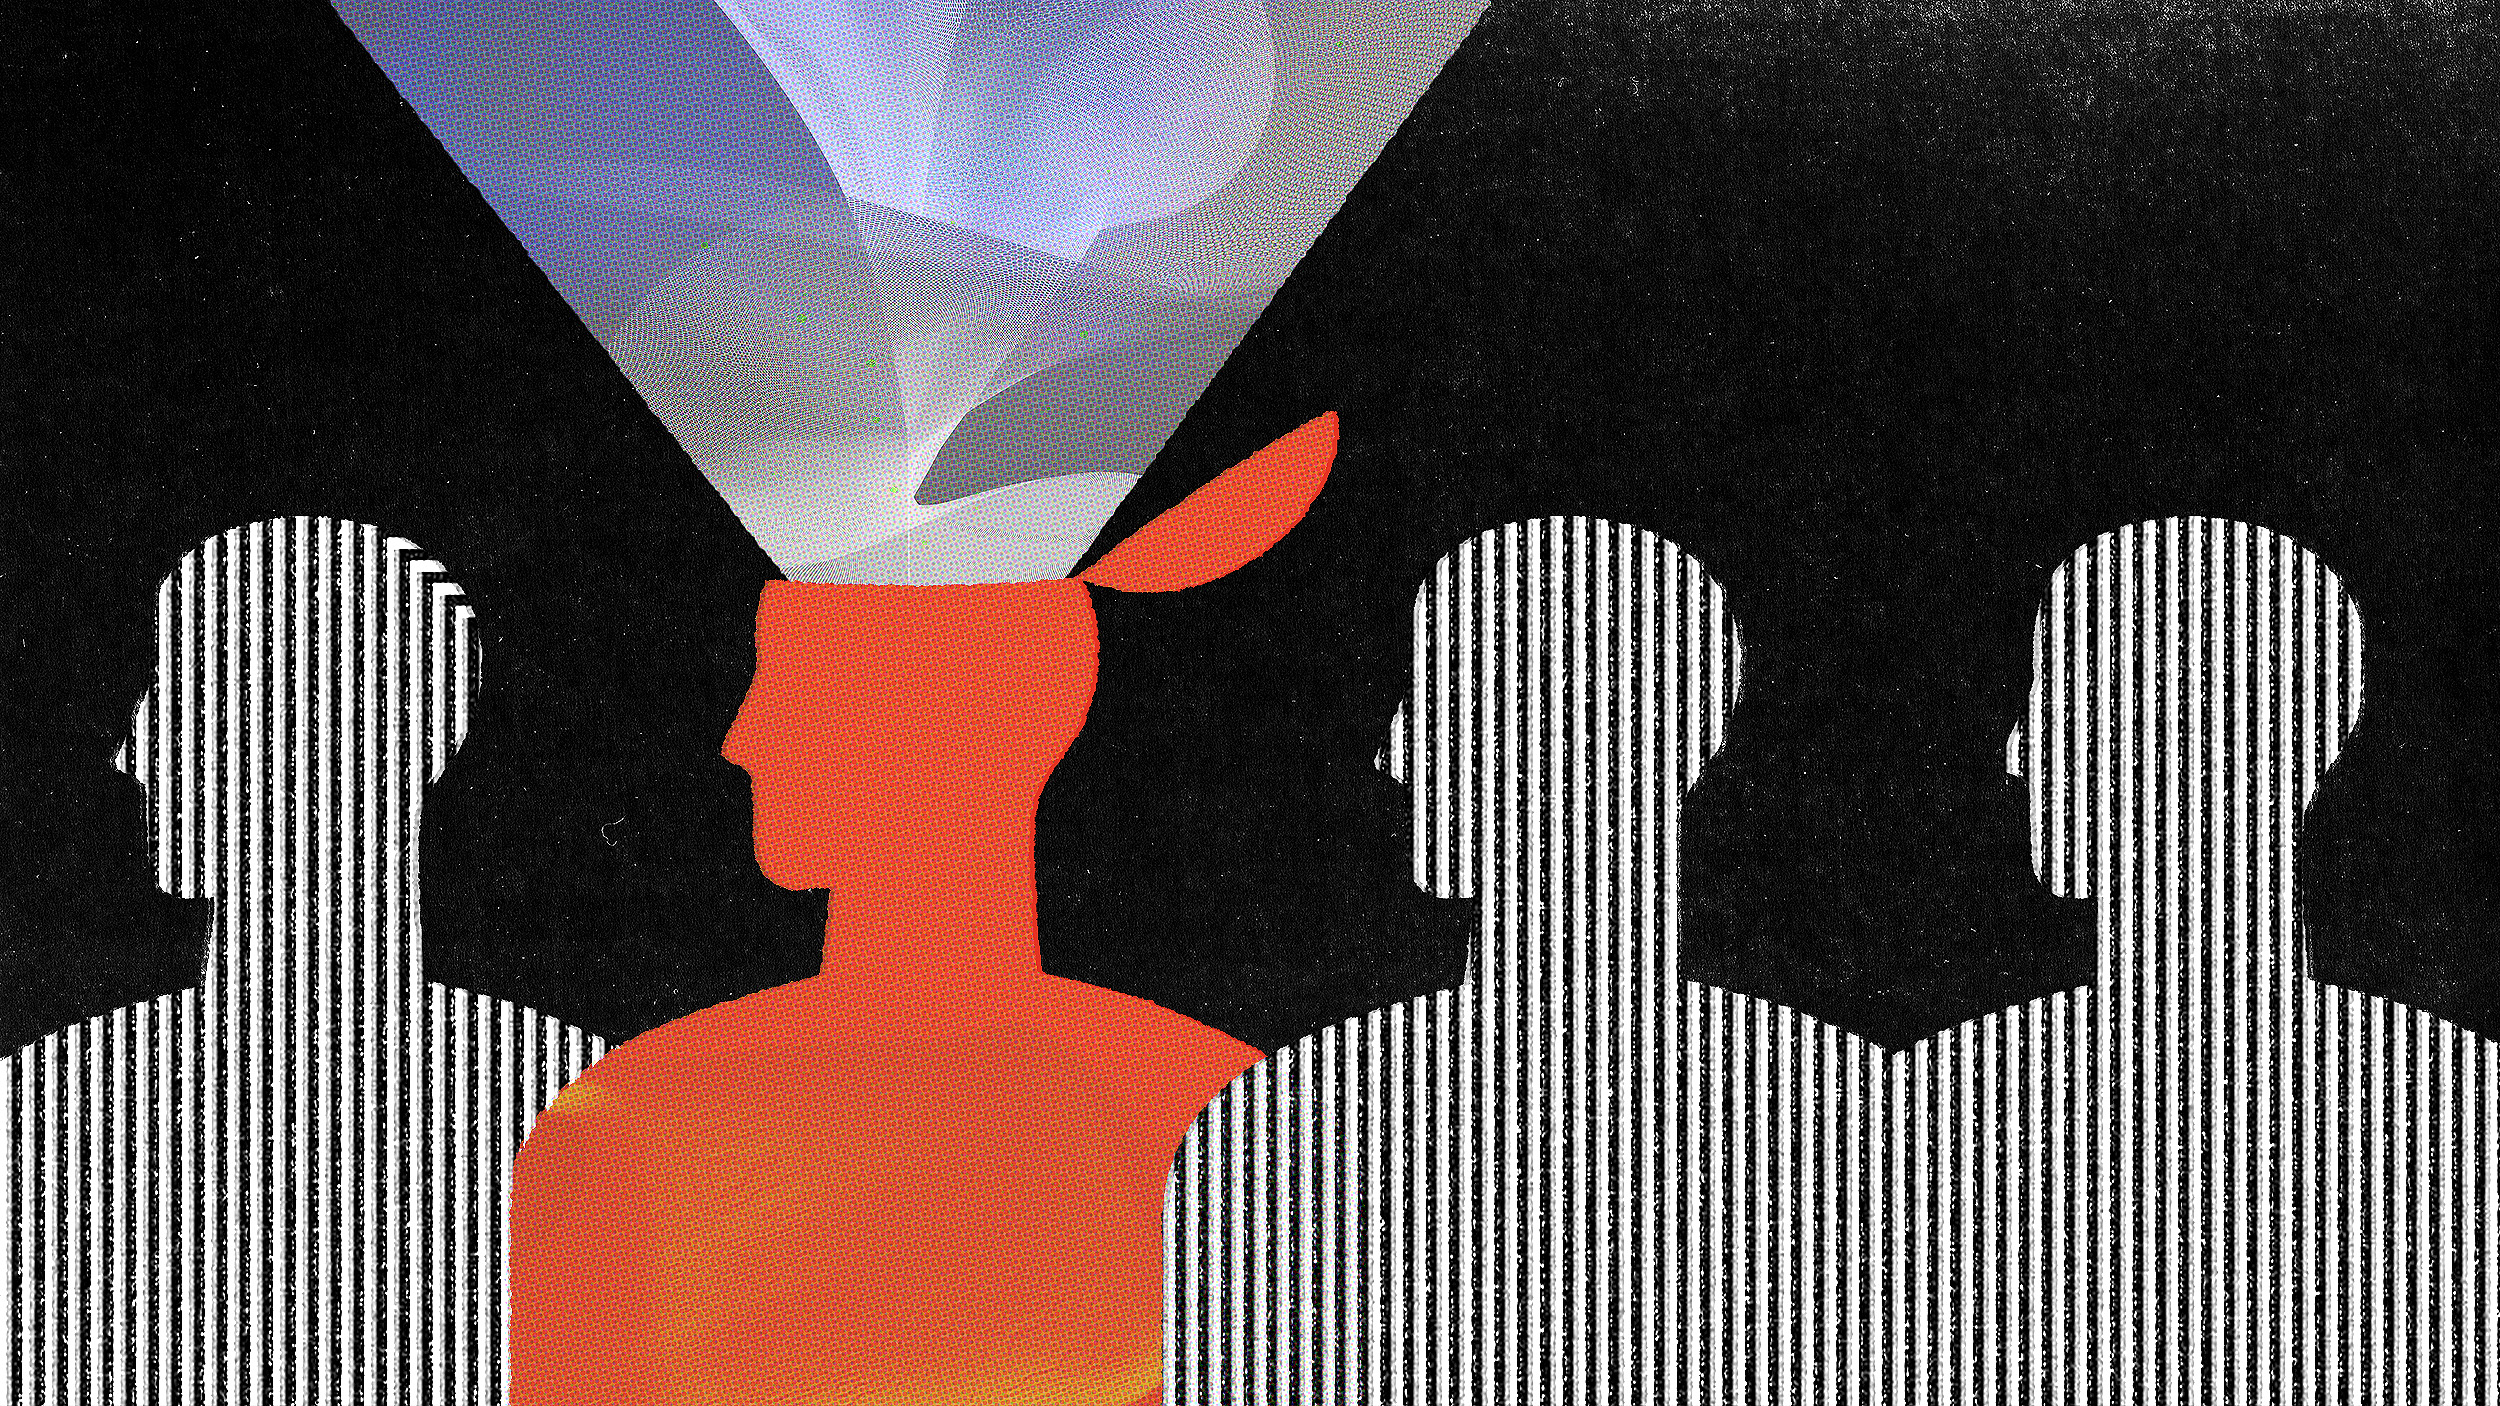 Illustration of a group of four abstract, faceless human silhouettes, with one figure highlighted in red emitting colorful light from the top of its head against a dark background, symbolizing innovative leaders.